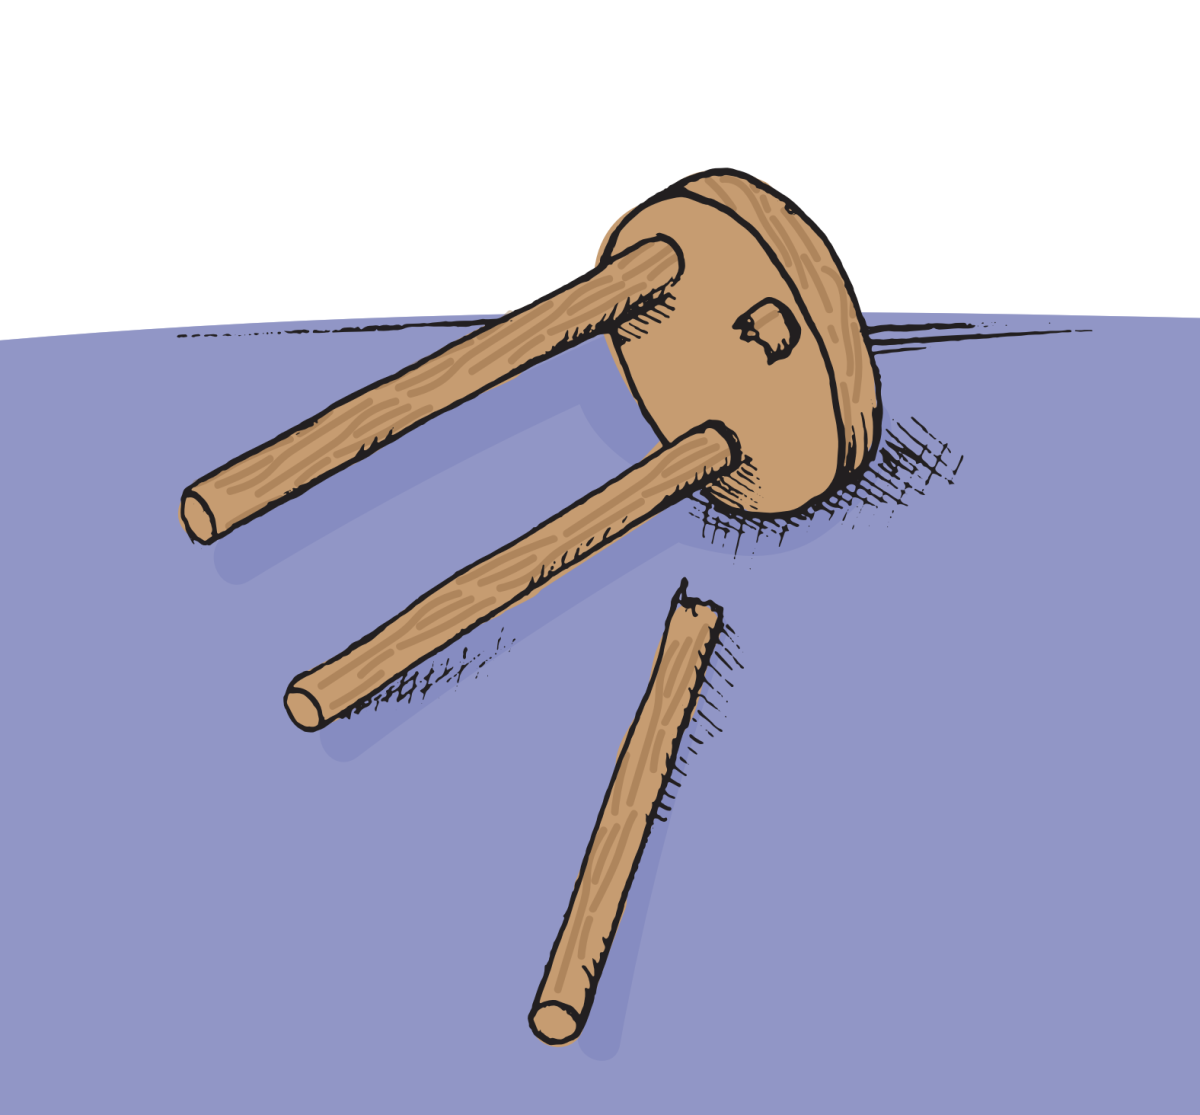 graphic of a brown stool knocked over with one leg broken off, on a blue ground